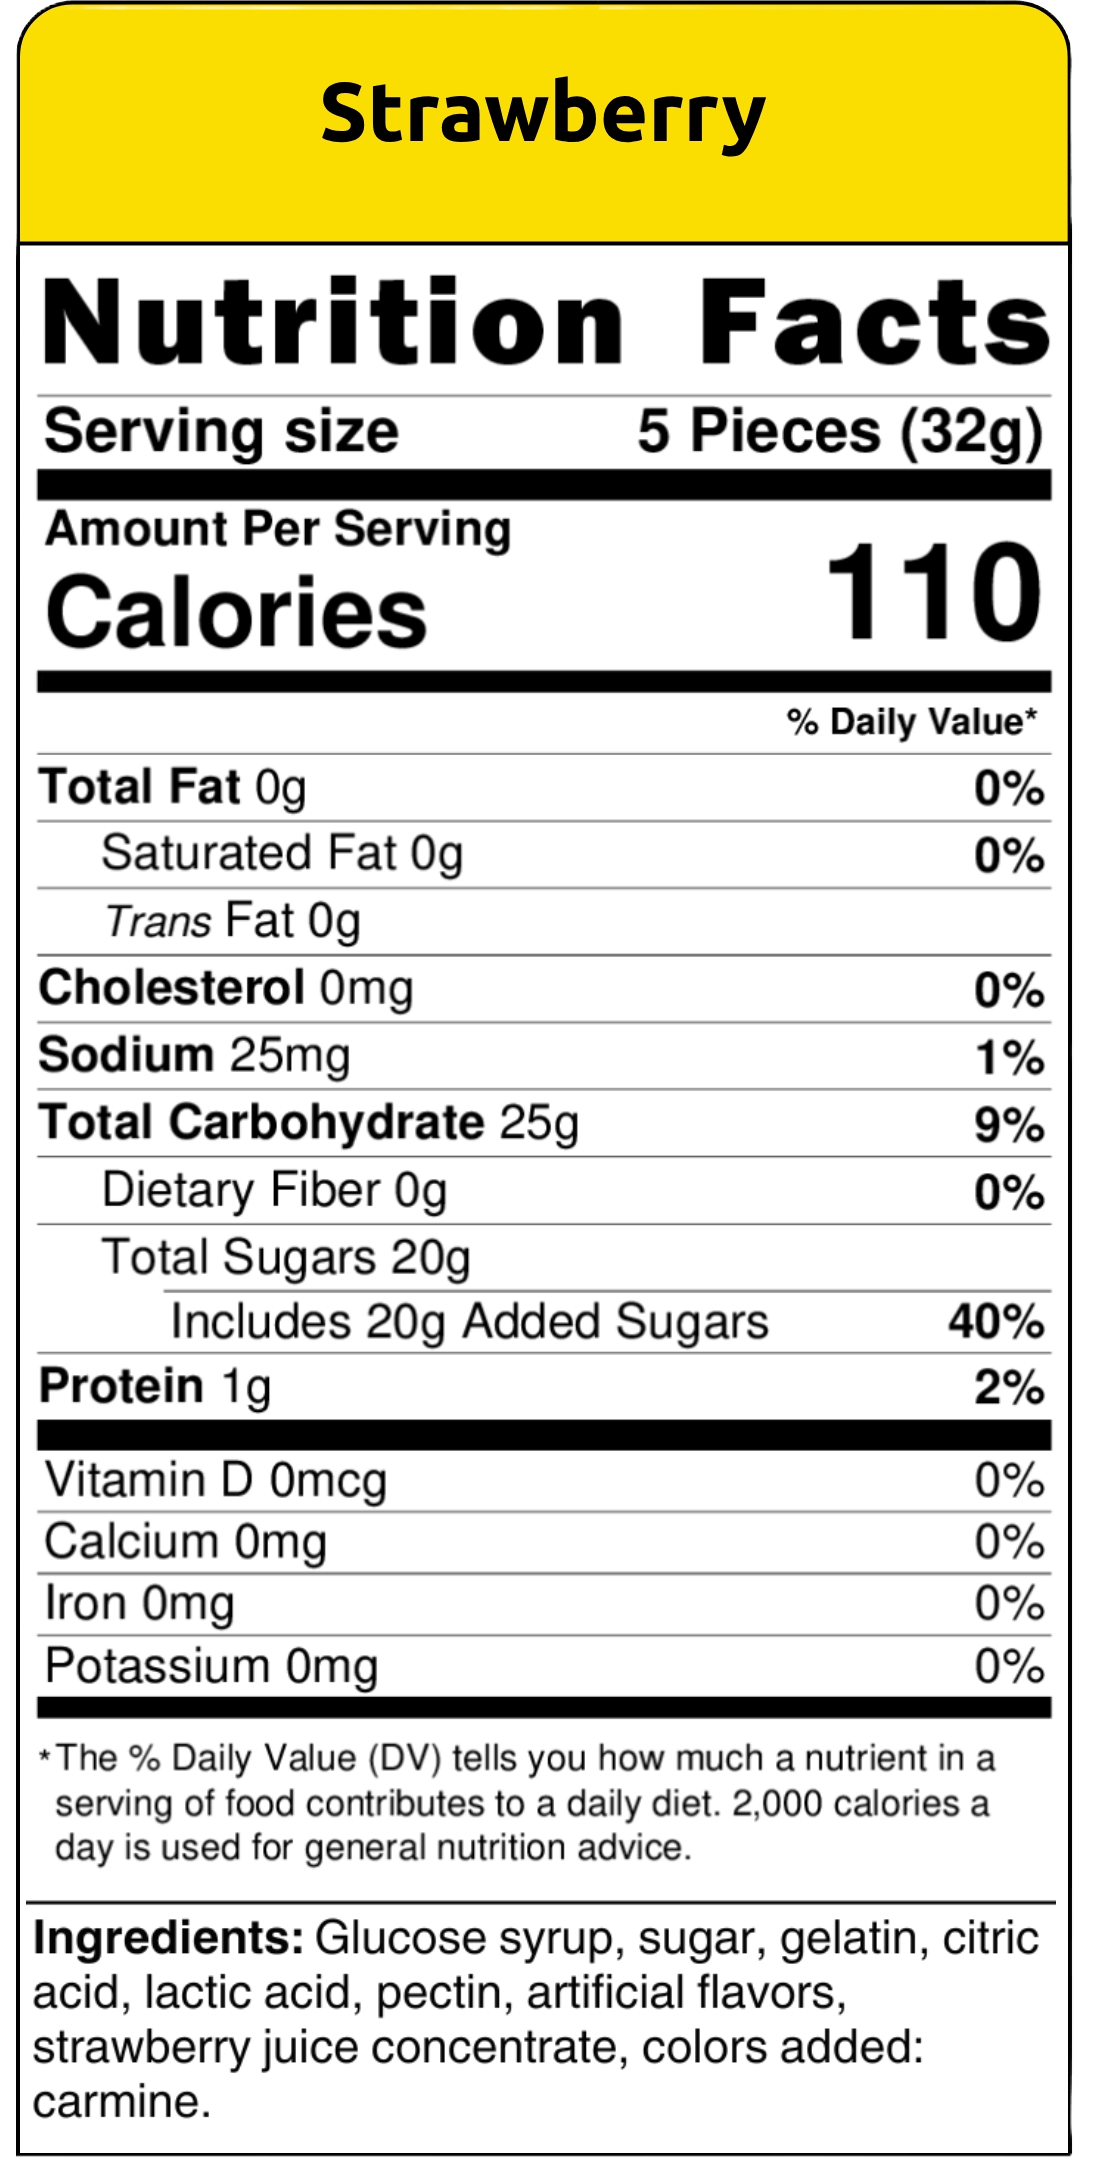 nutritional facts creamy dreamy strawberries